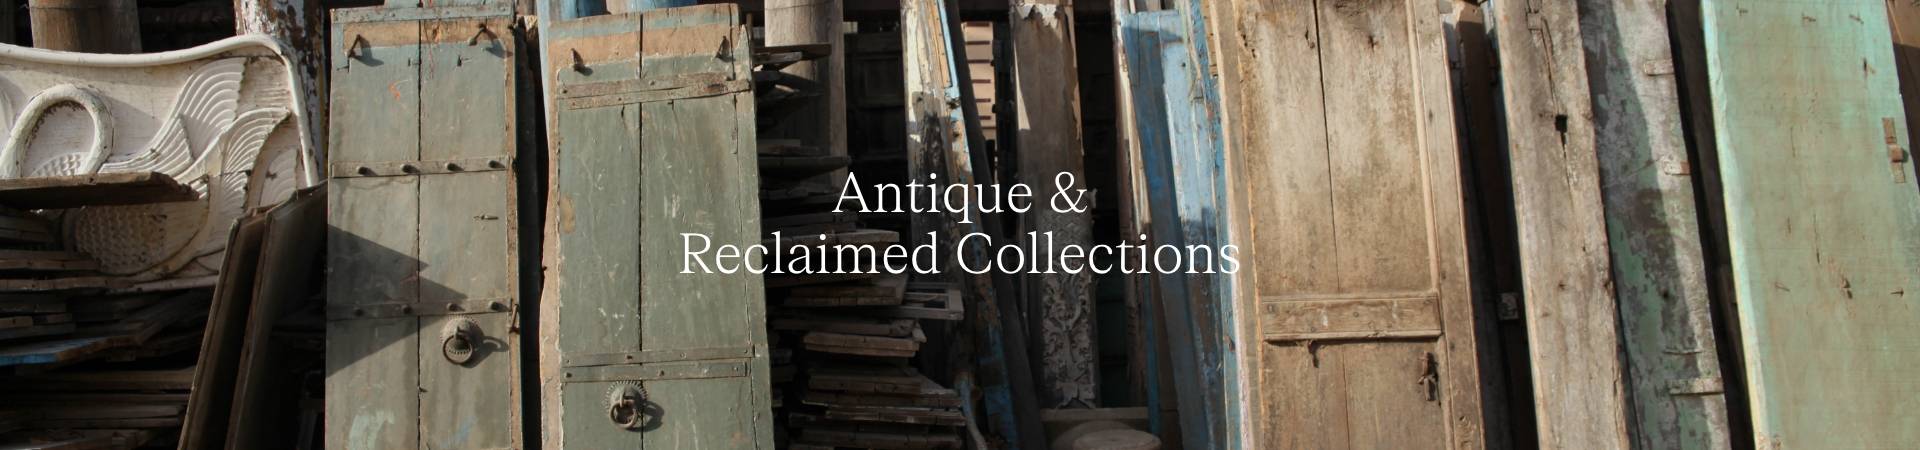 Antique & Reclaimed Collections.jpg